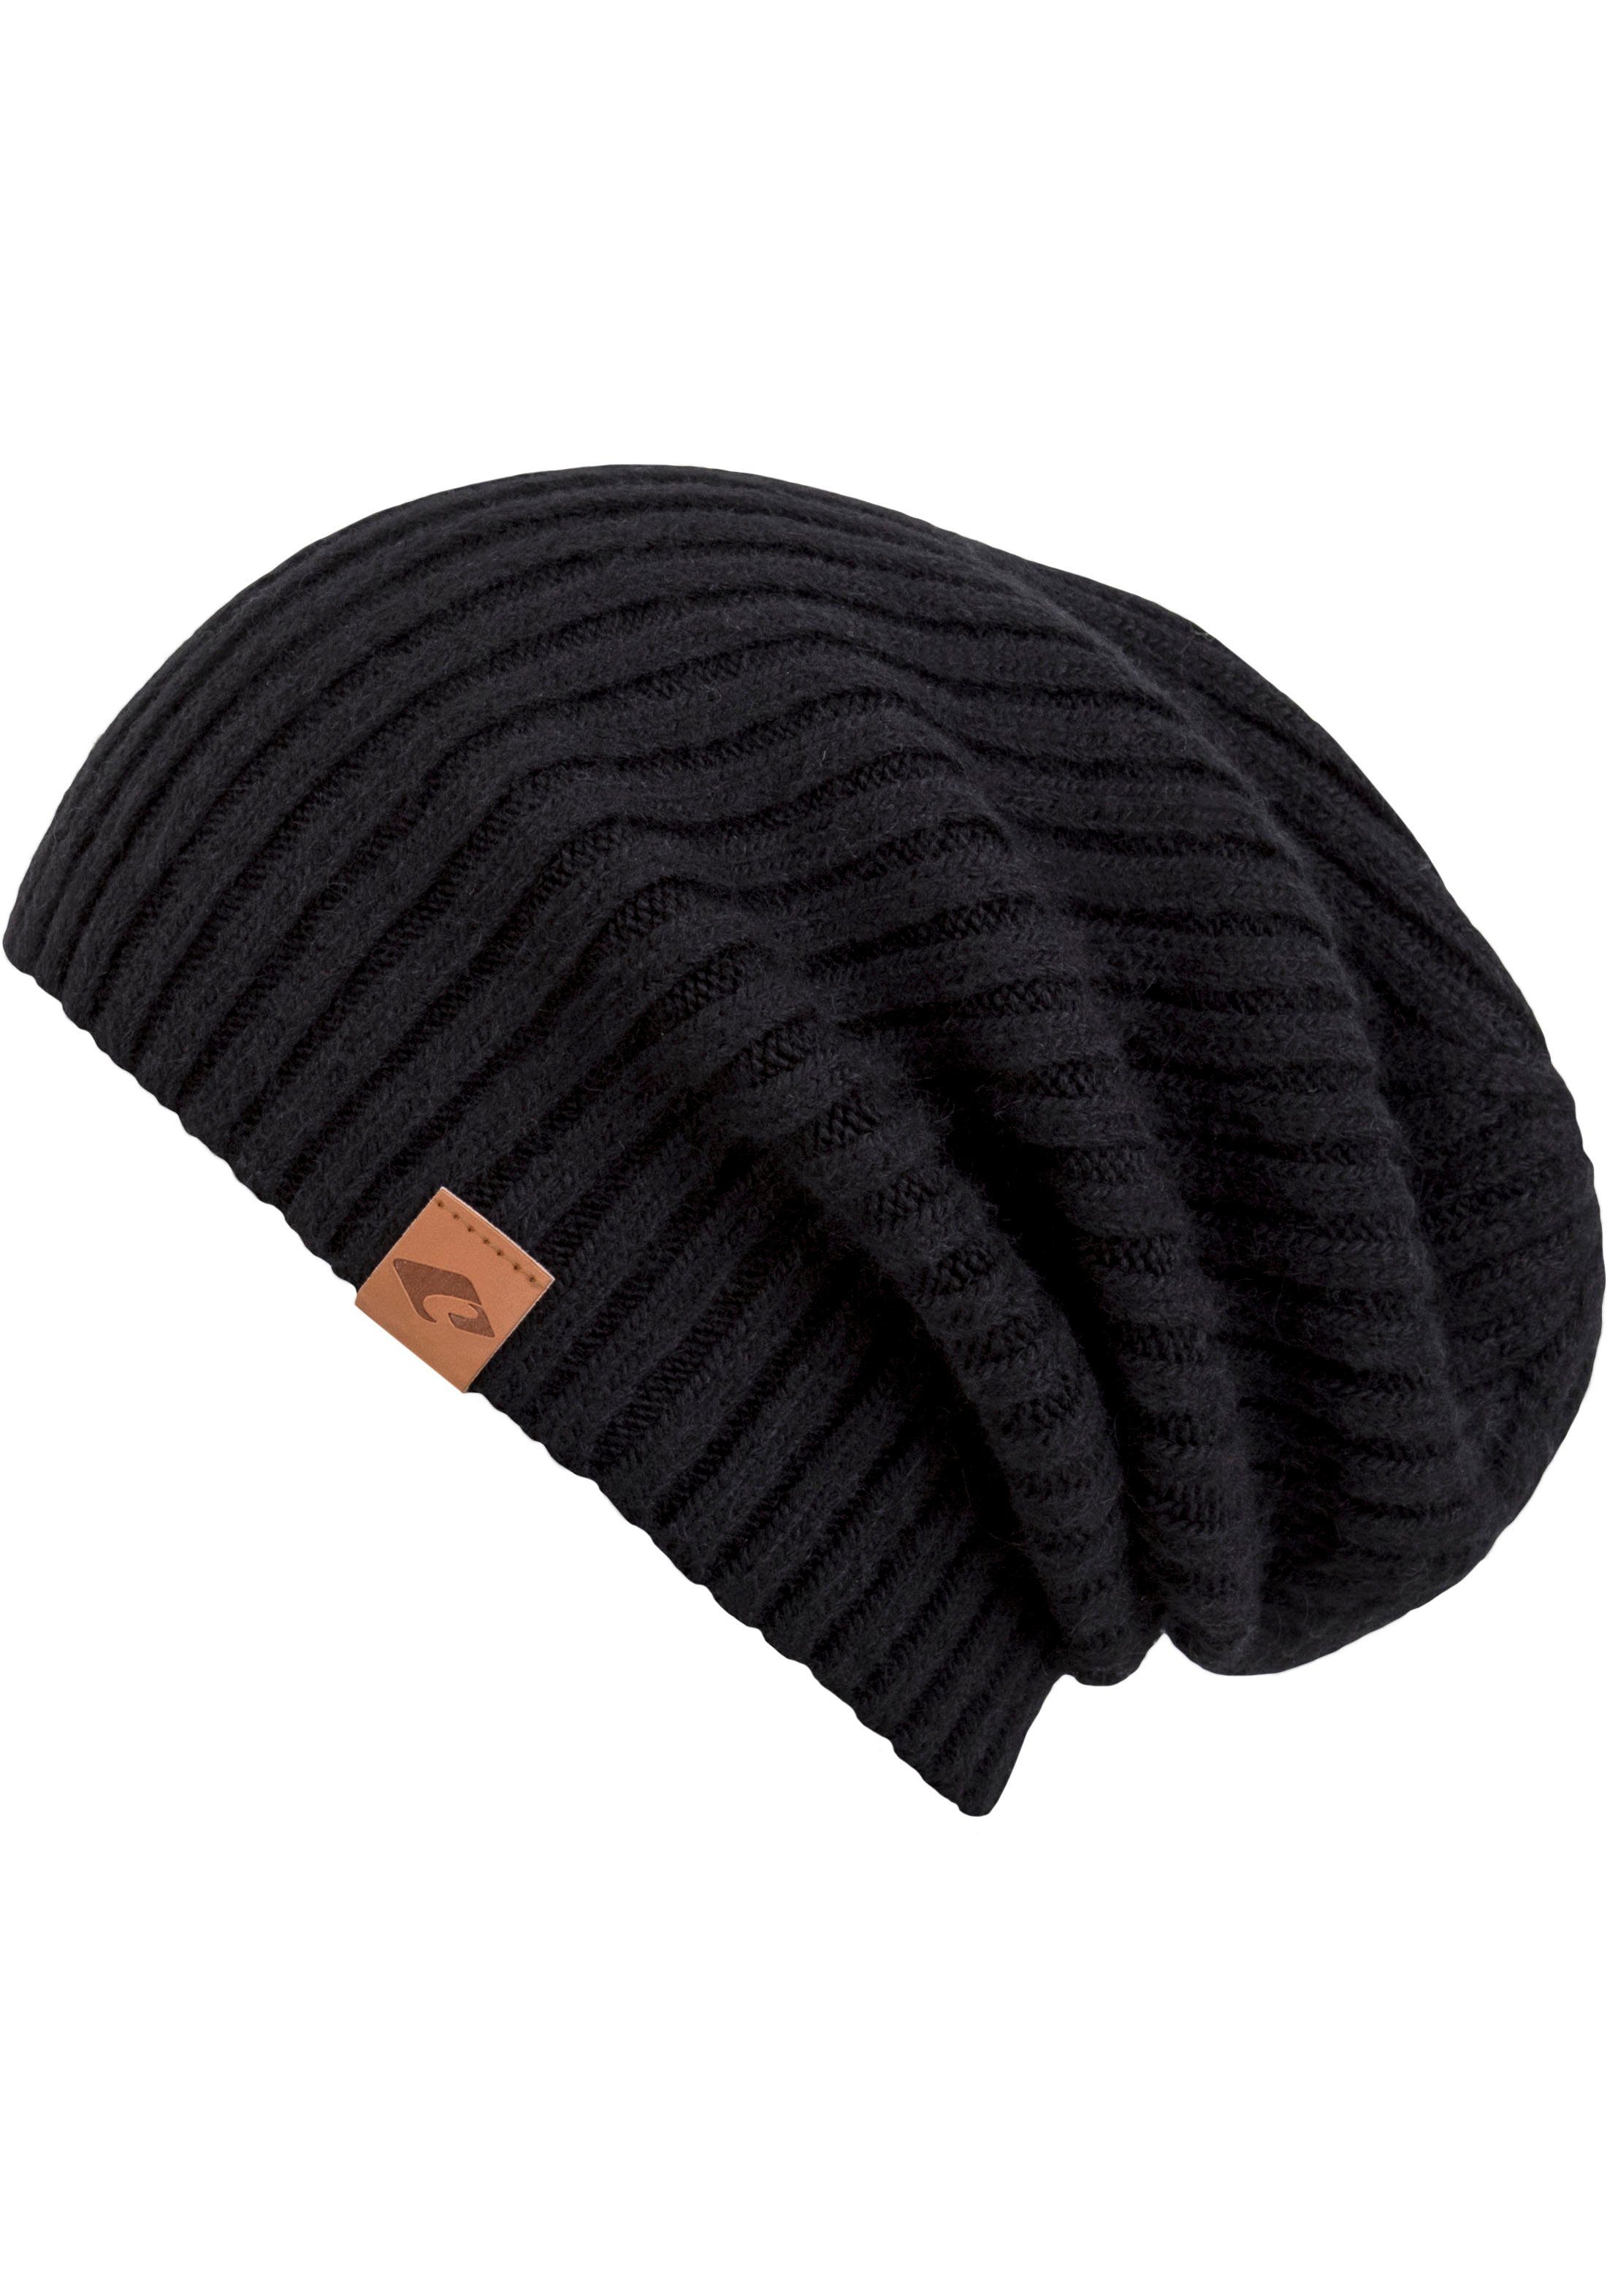 Hat, flexibel cm Justin Beanie One chillouts 58-62 ) ( ca. Size